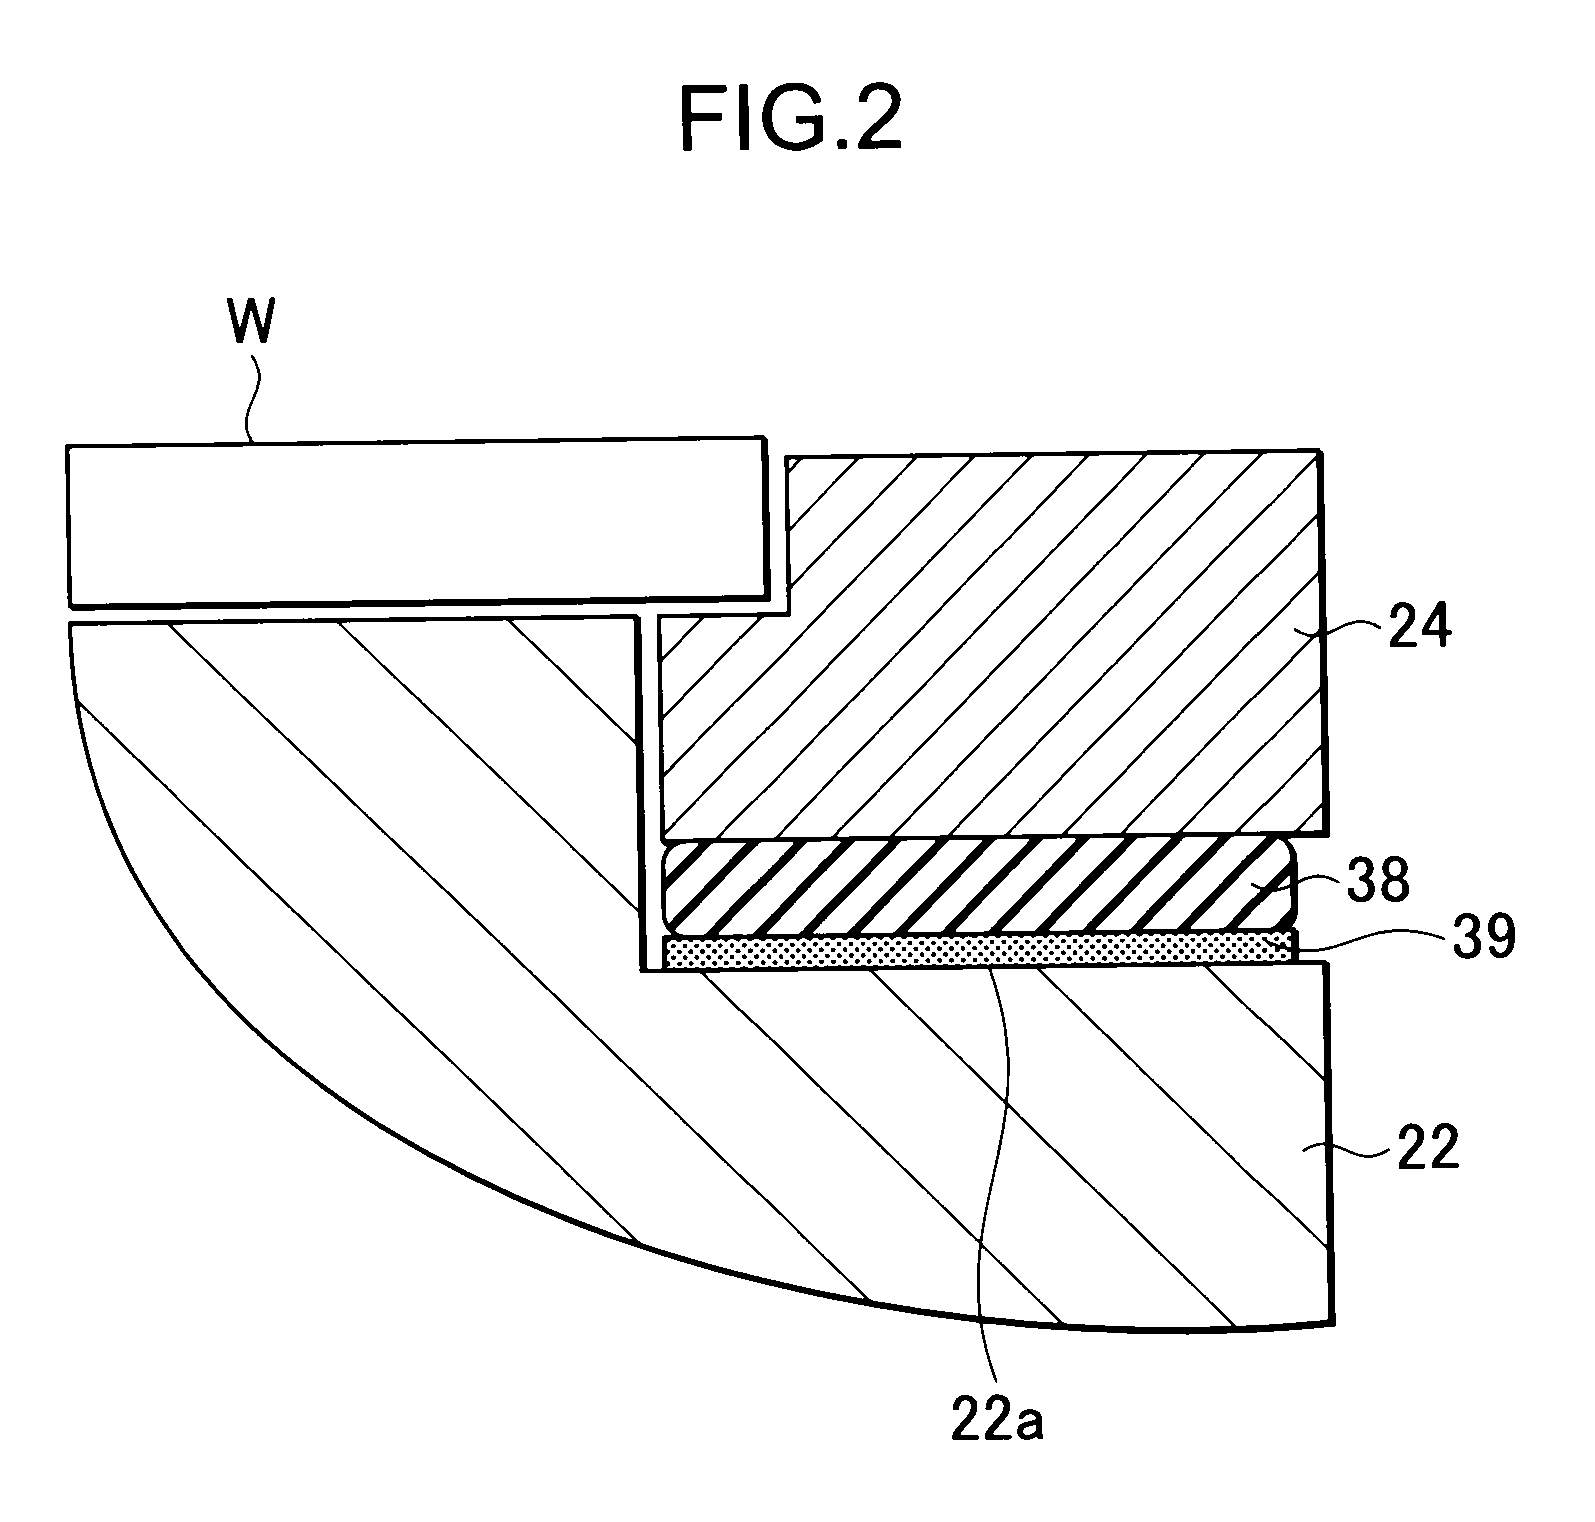 Substrate processing apparatus and substrate mounting stage on which focus ring is mounted